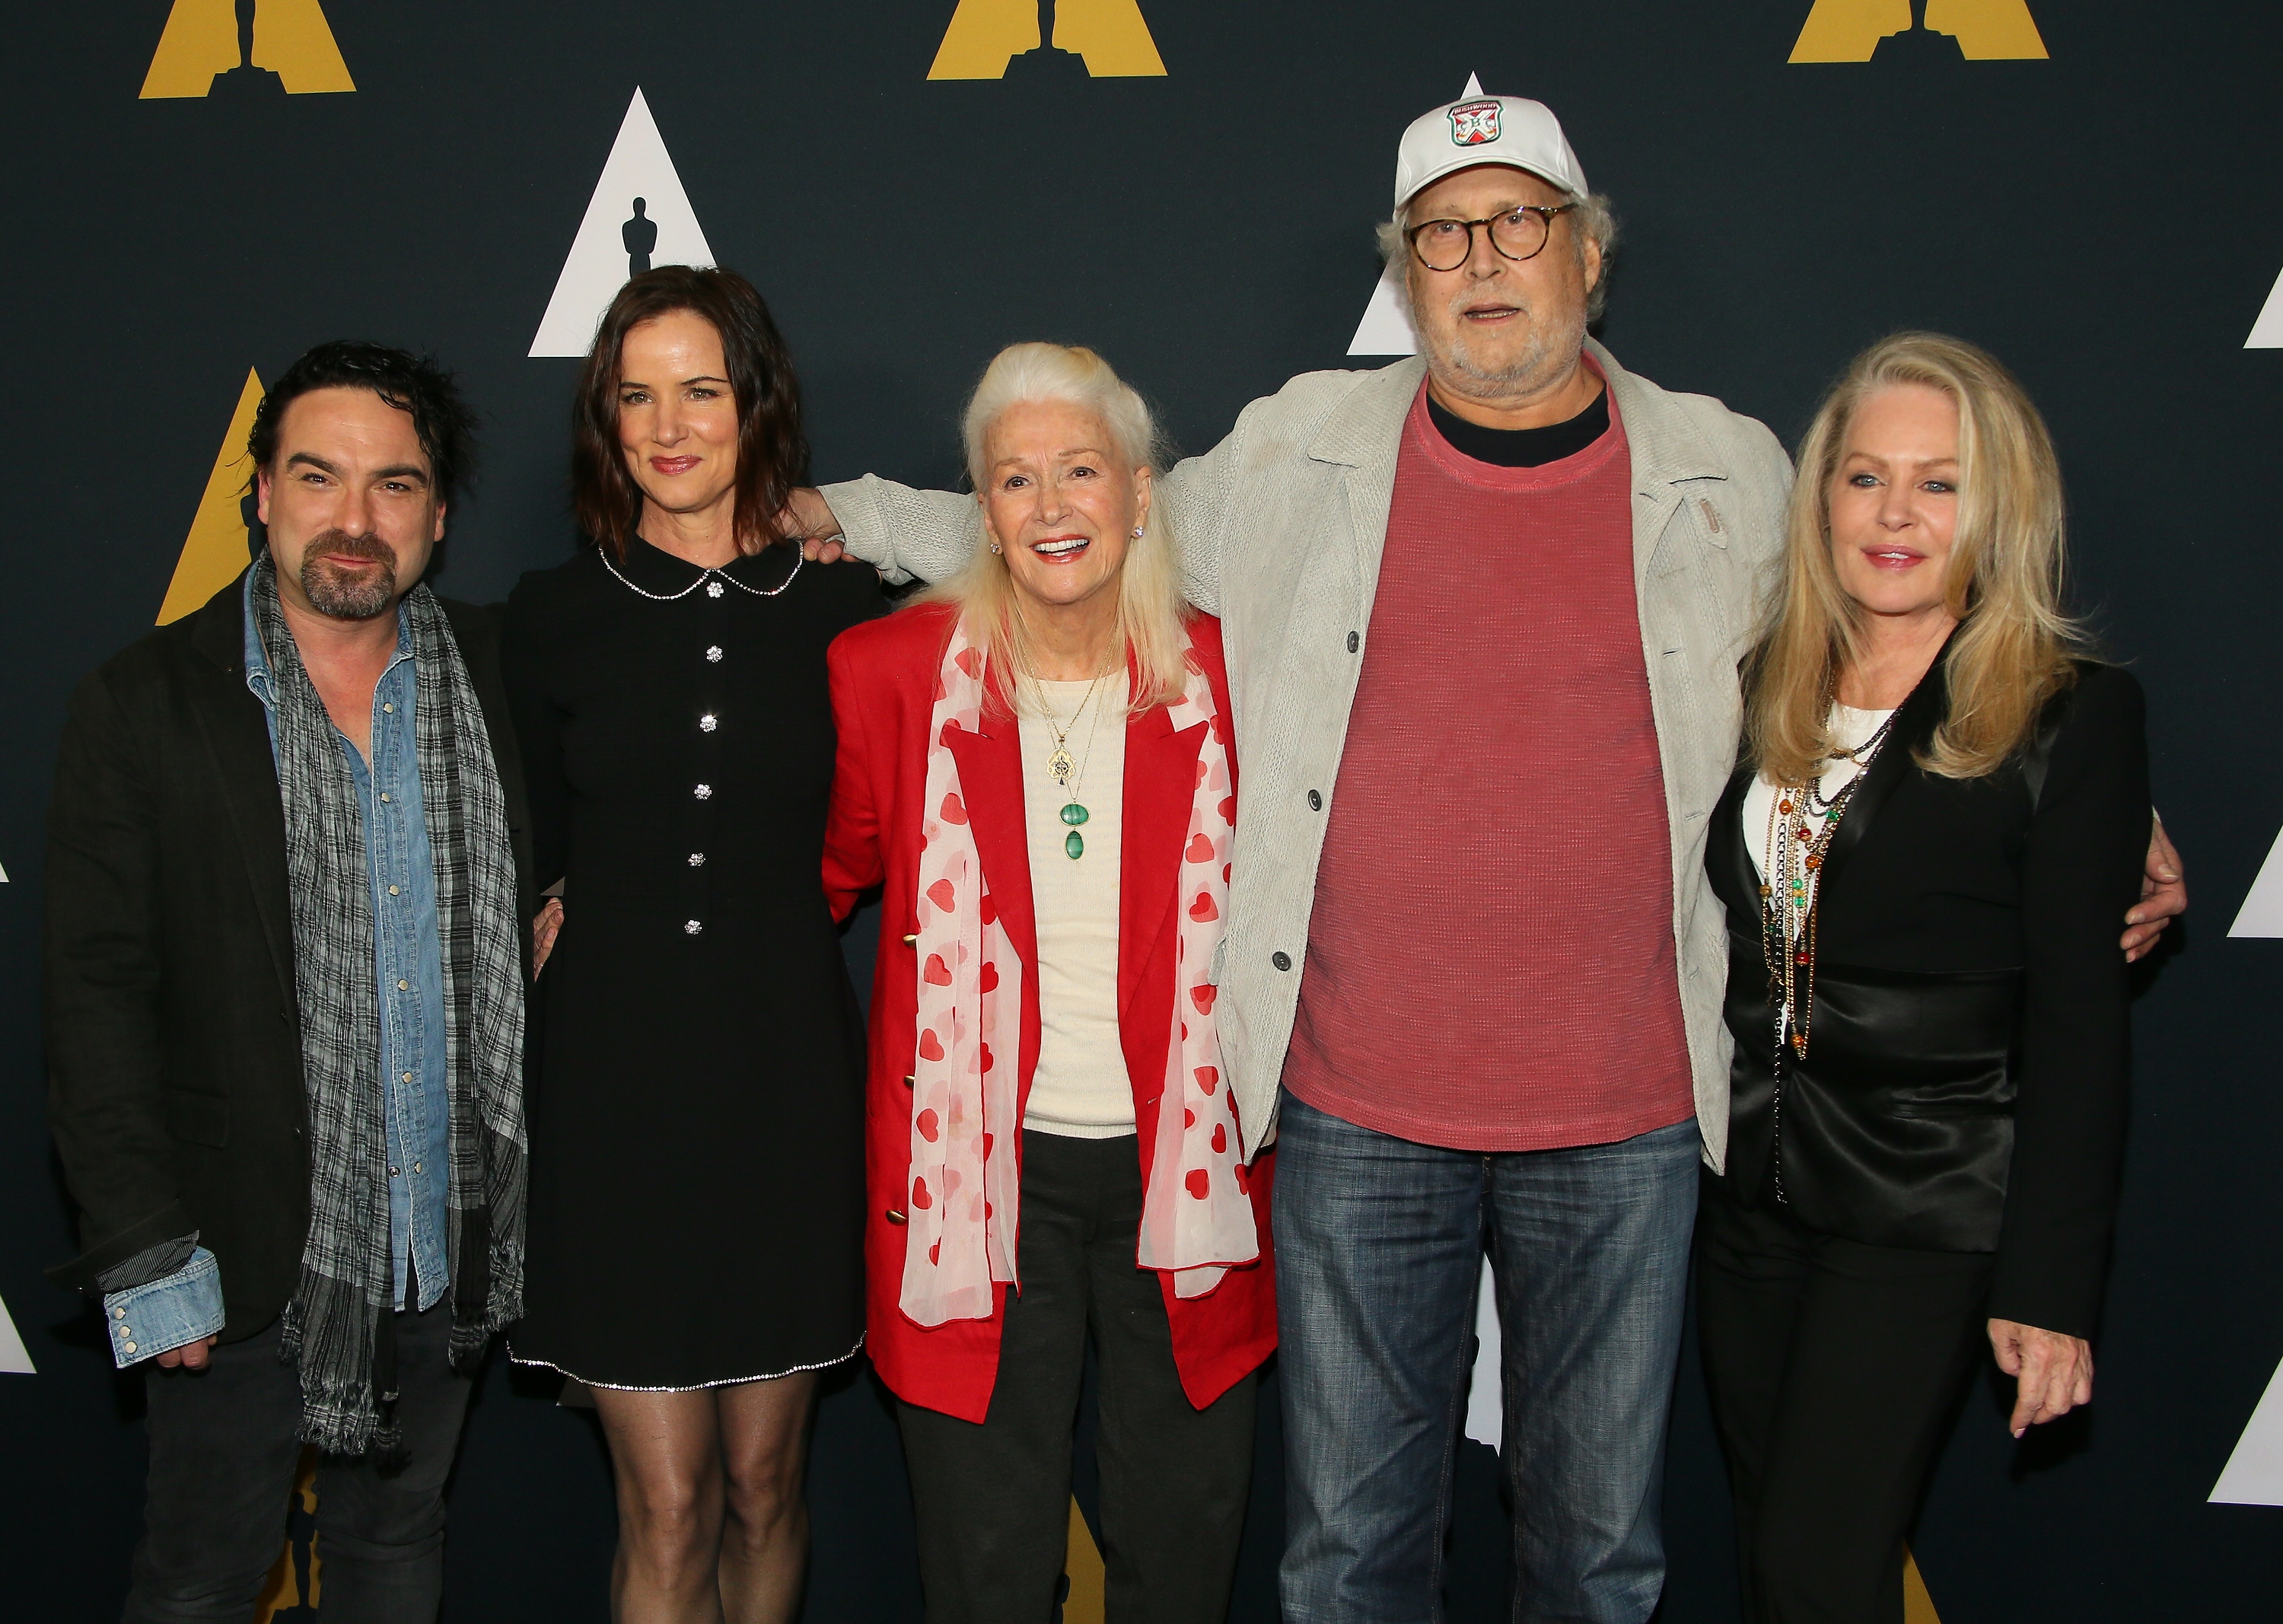 Johnny Galecki, Juliette Lewis, Diane Ladd, Chevy Chase, and Beverly D'Angelo at the Academy of Motion Picture Arts and Sciences 30th Anniversary Screening of "National Lampoons Christmas Vacation" in Beverly Hills, California, on December 12, 2019 | Source: Getty Images